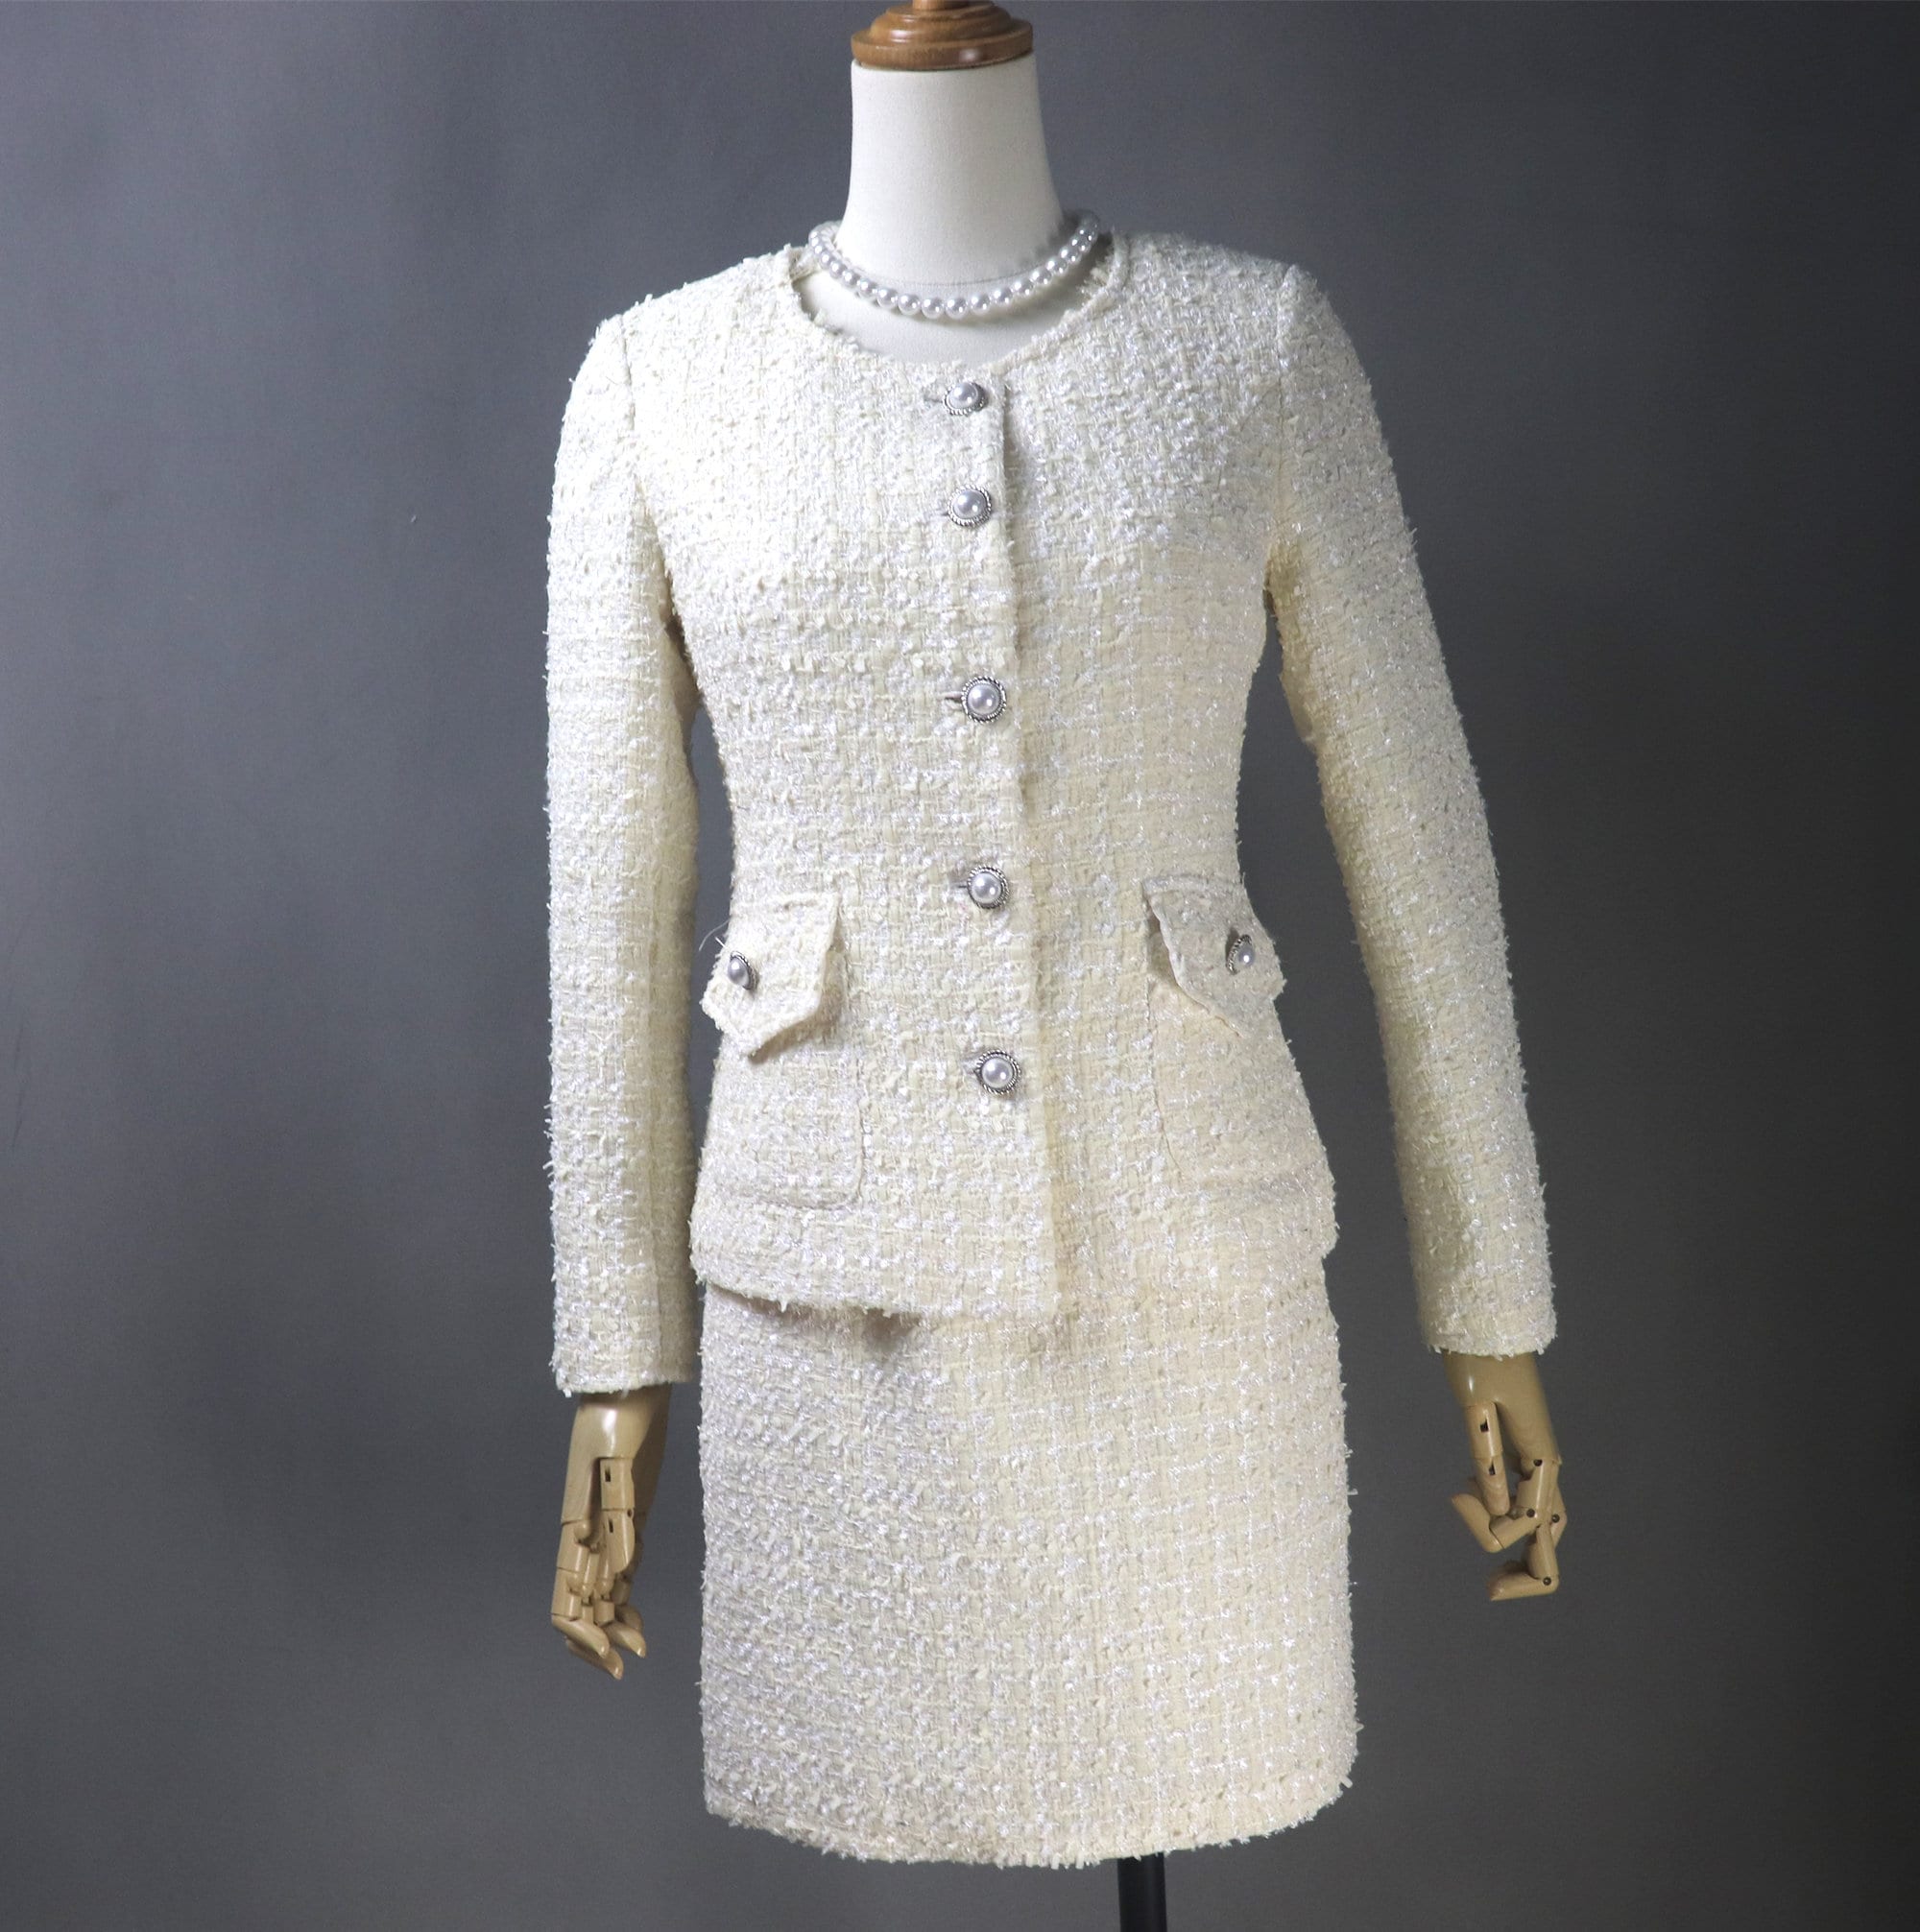 Chanel Cream Tweed Mother of Pearl Beaded Trim Jacket Size 36